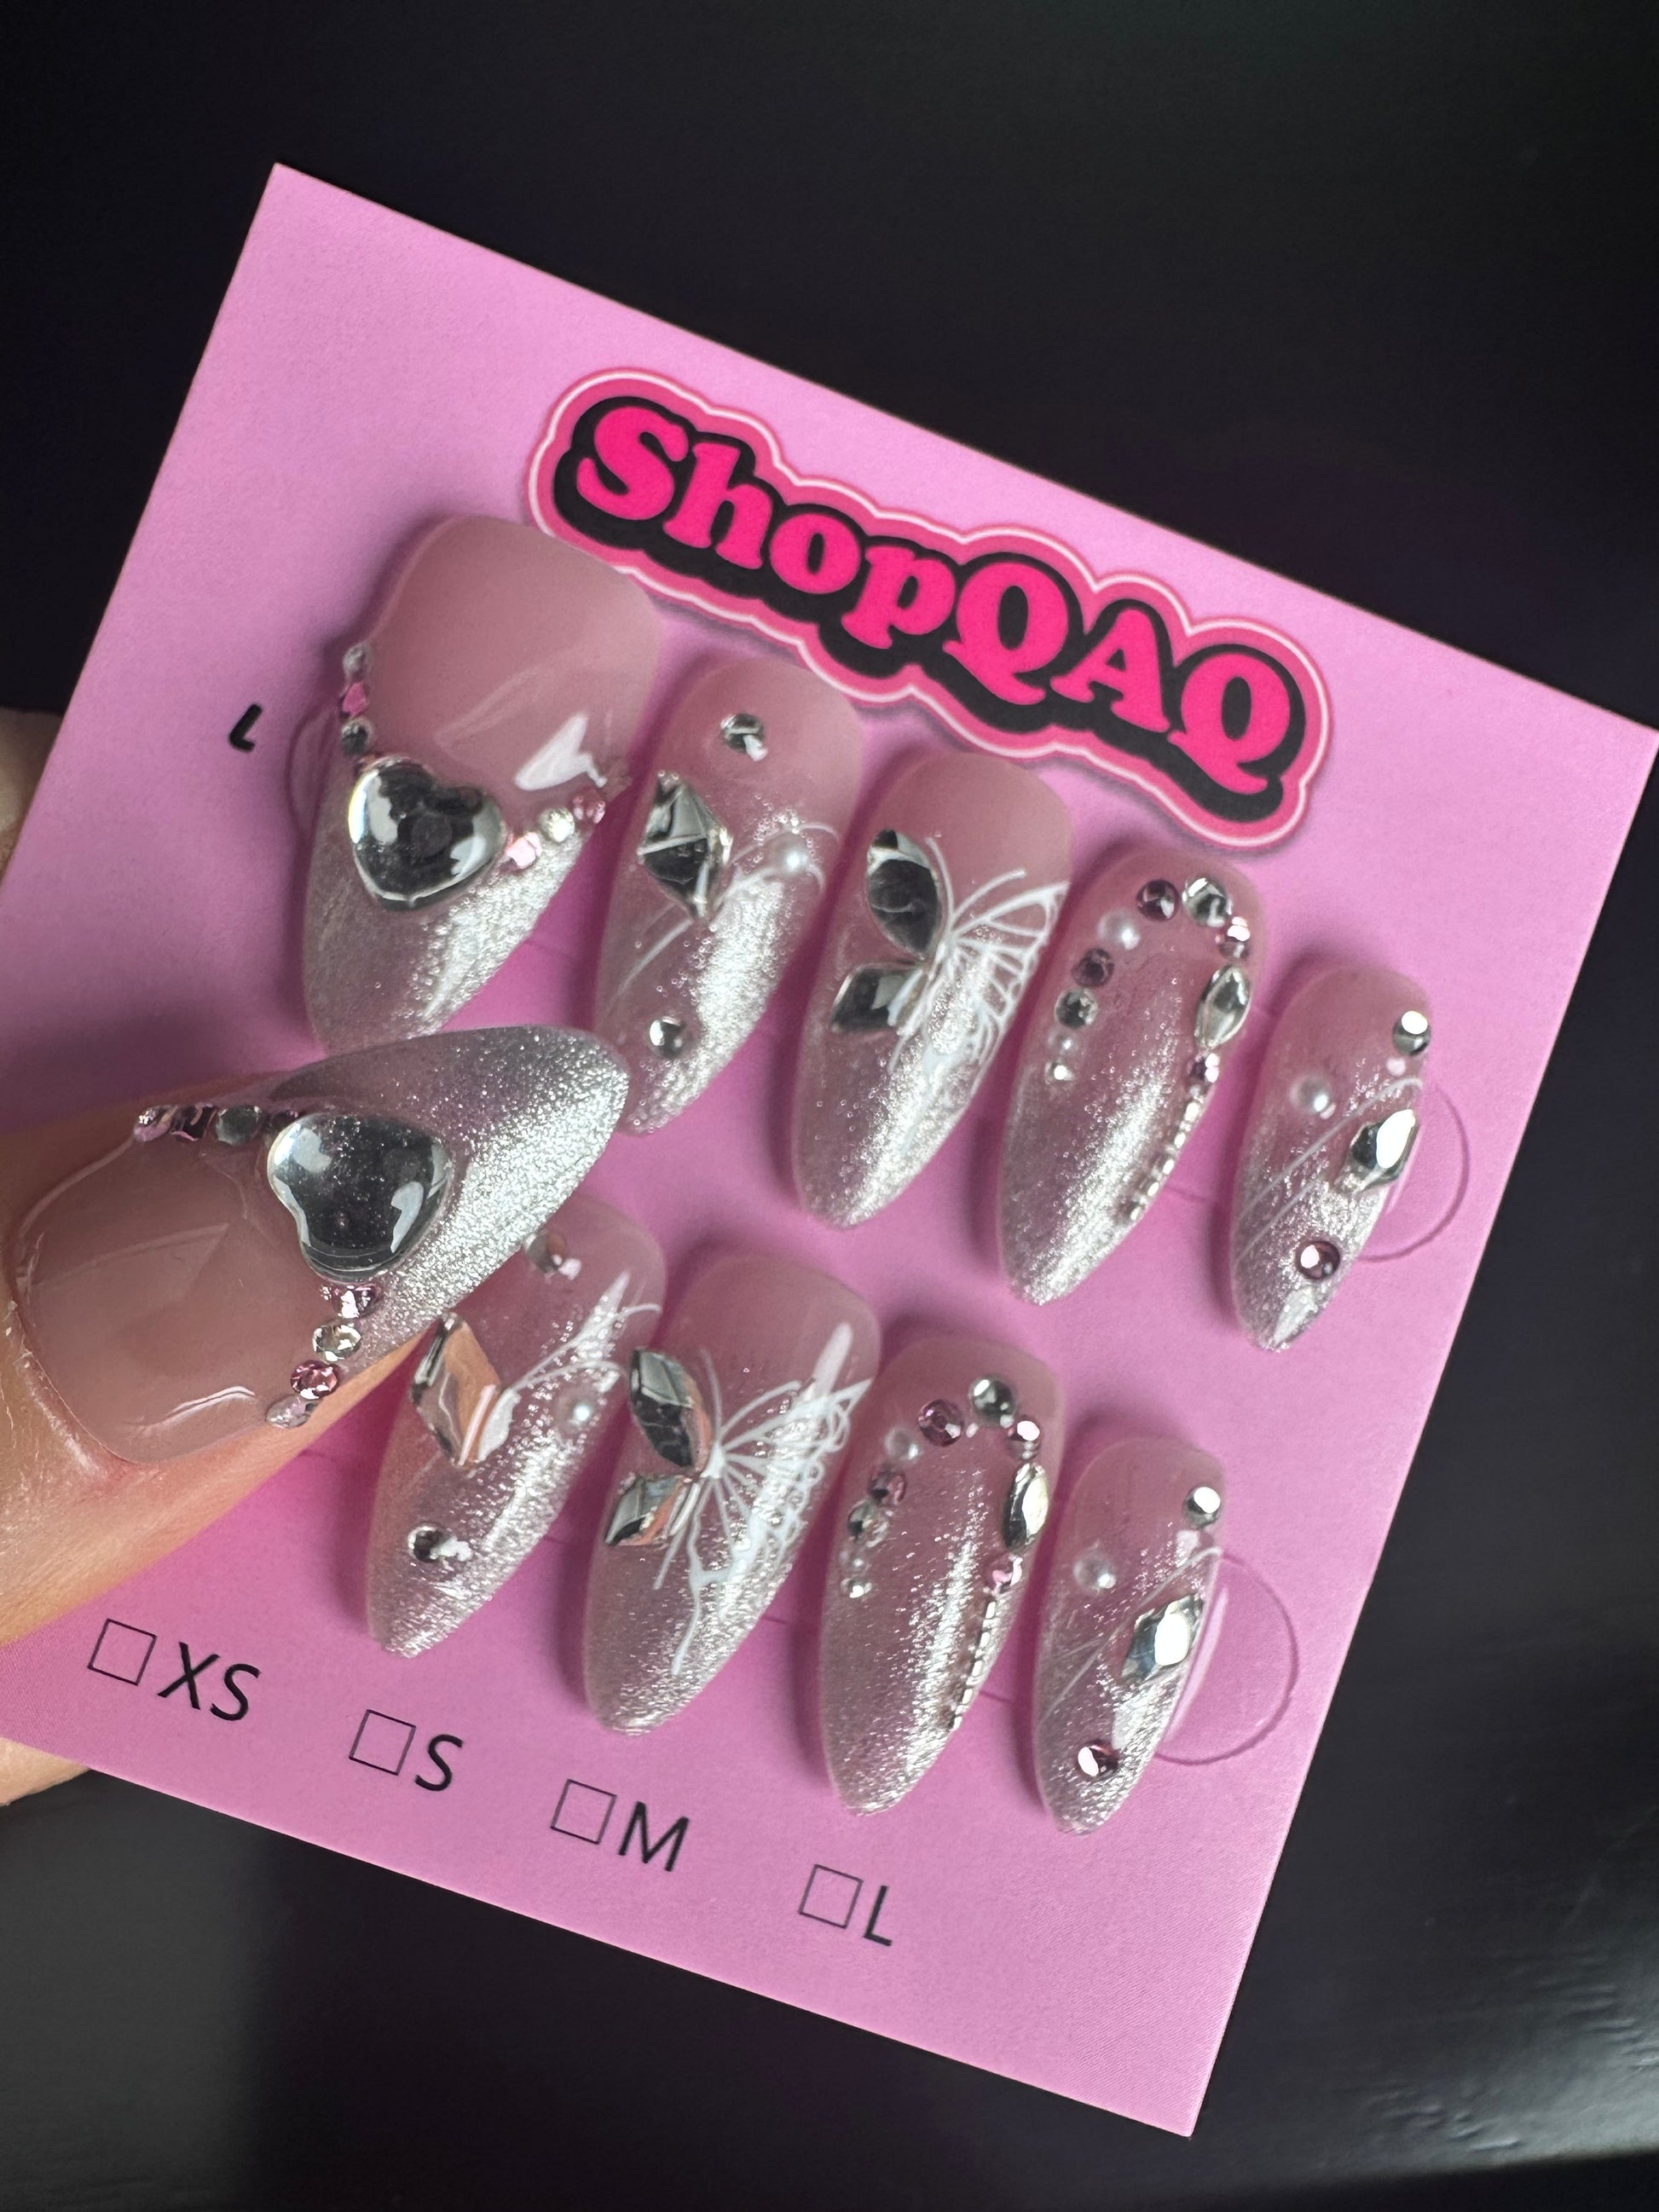 New Cat Eye Press-On Nails - Handcrafted, Trendy Aurora Hollow Butterfly Design False Nails from SHOPQAQ